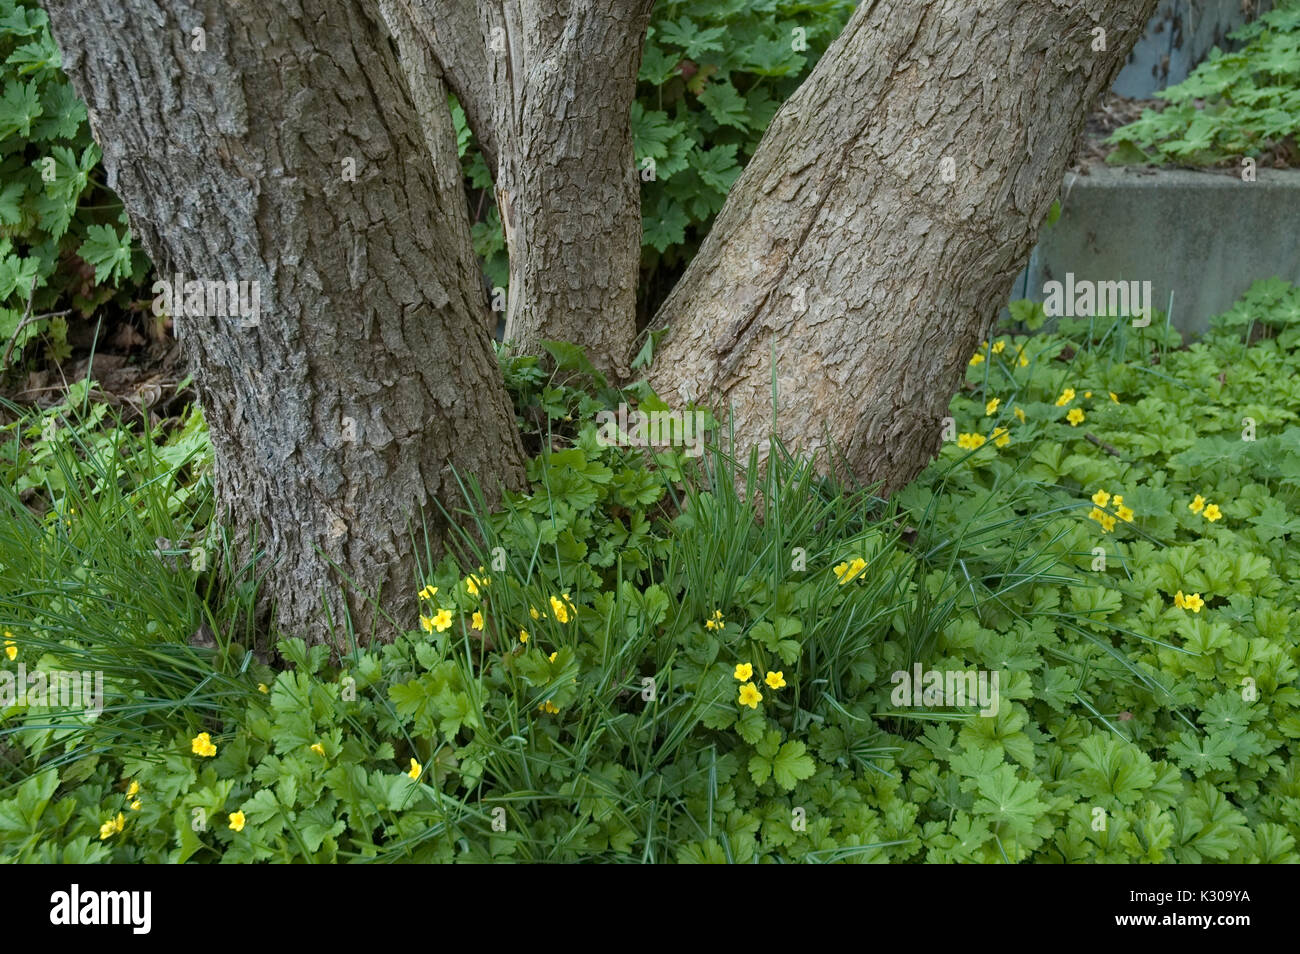 barren strawberries growing round a tree trunk Stock Photo